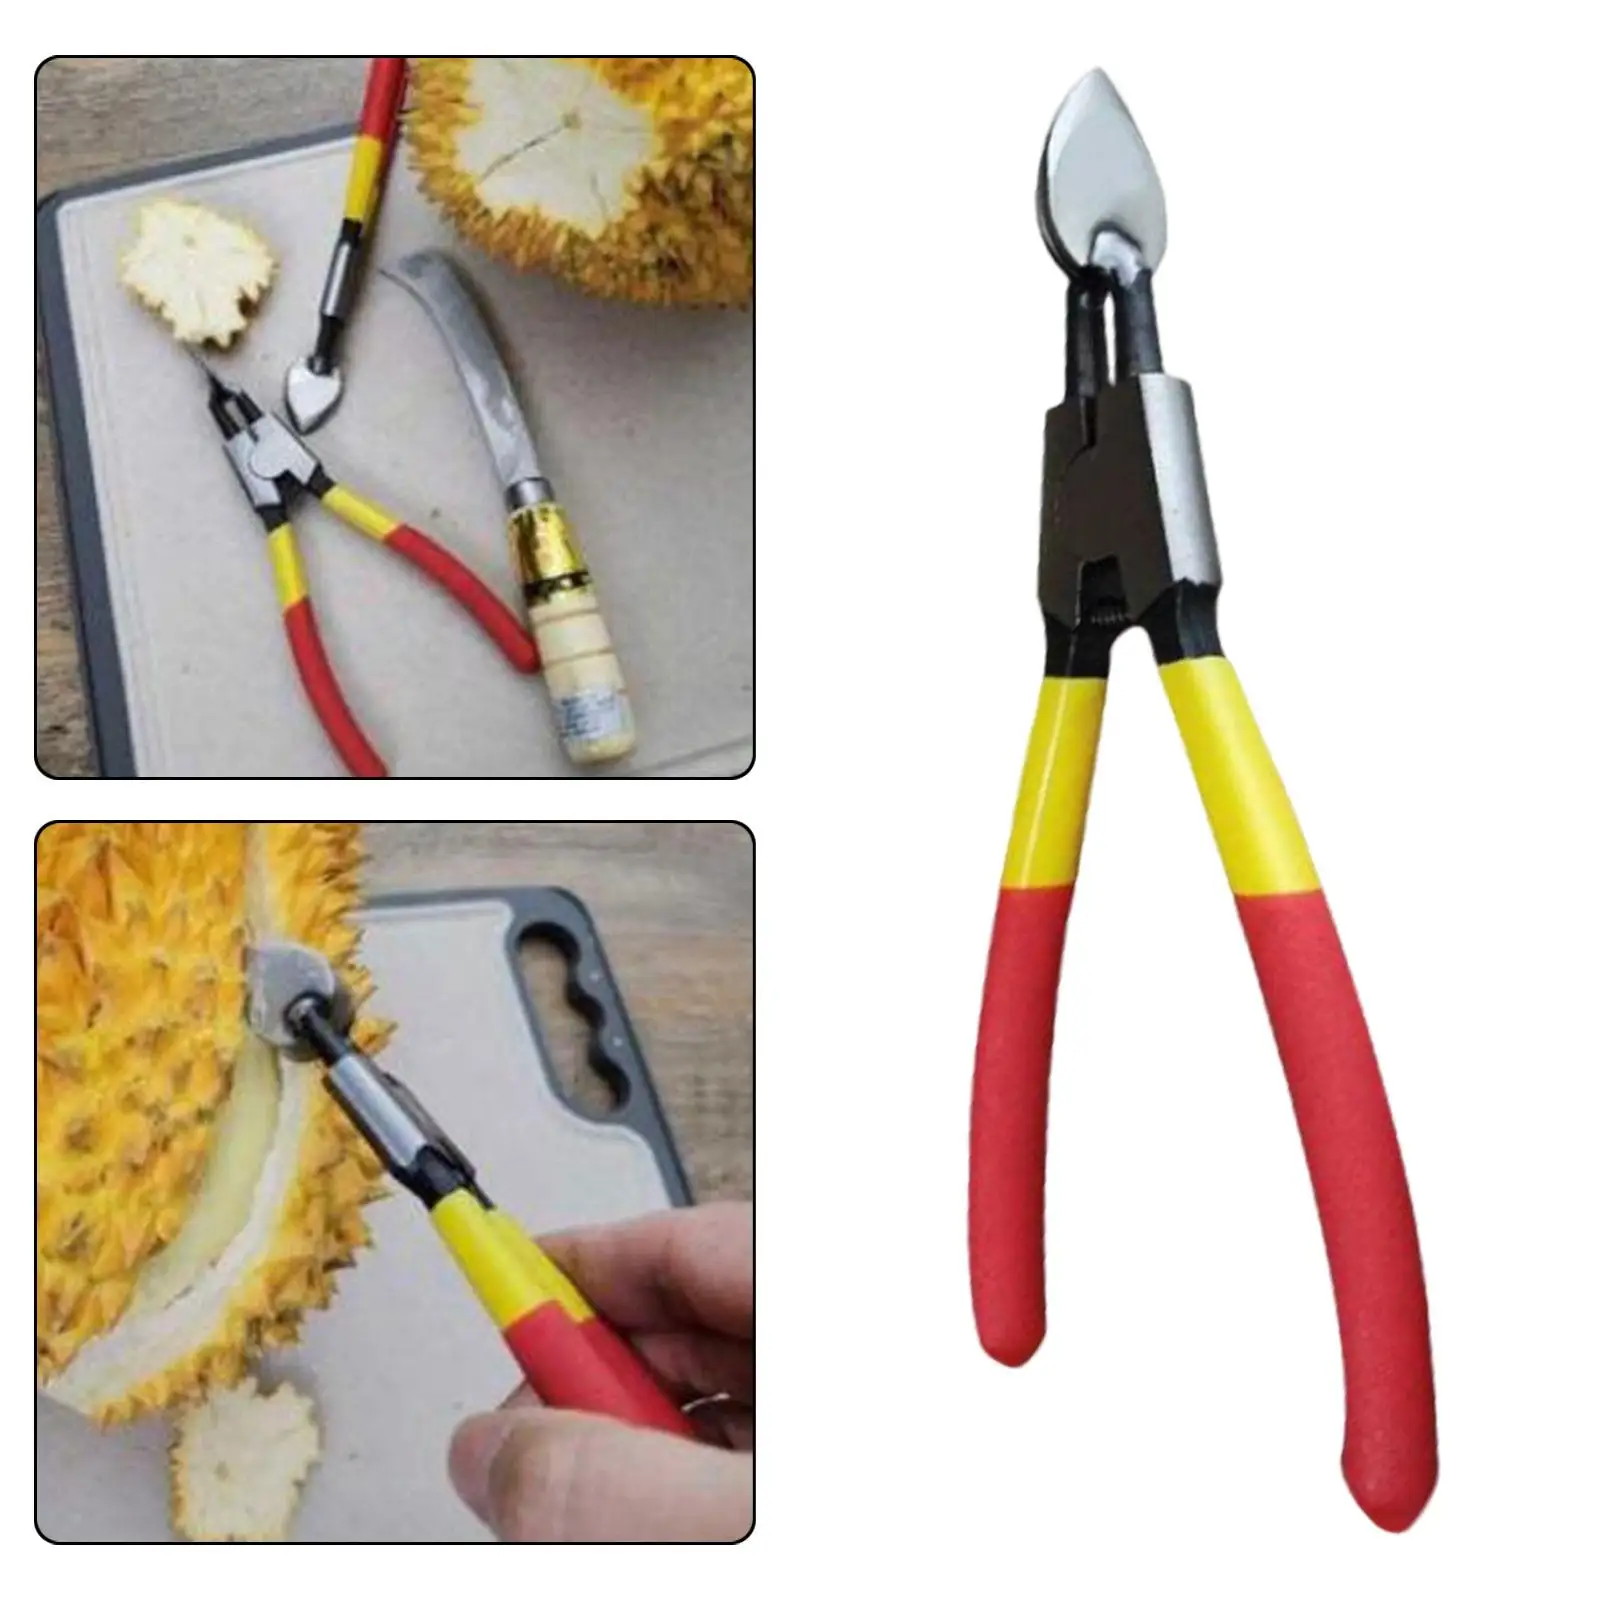 Manual Durian Shelling Machine Peeling 7.87`` Save Labors Iron Fruit Durian Shell Opener Clip for Kitchen Cooking Grocery